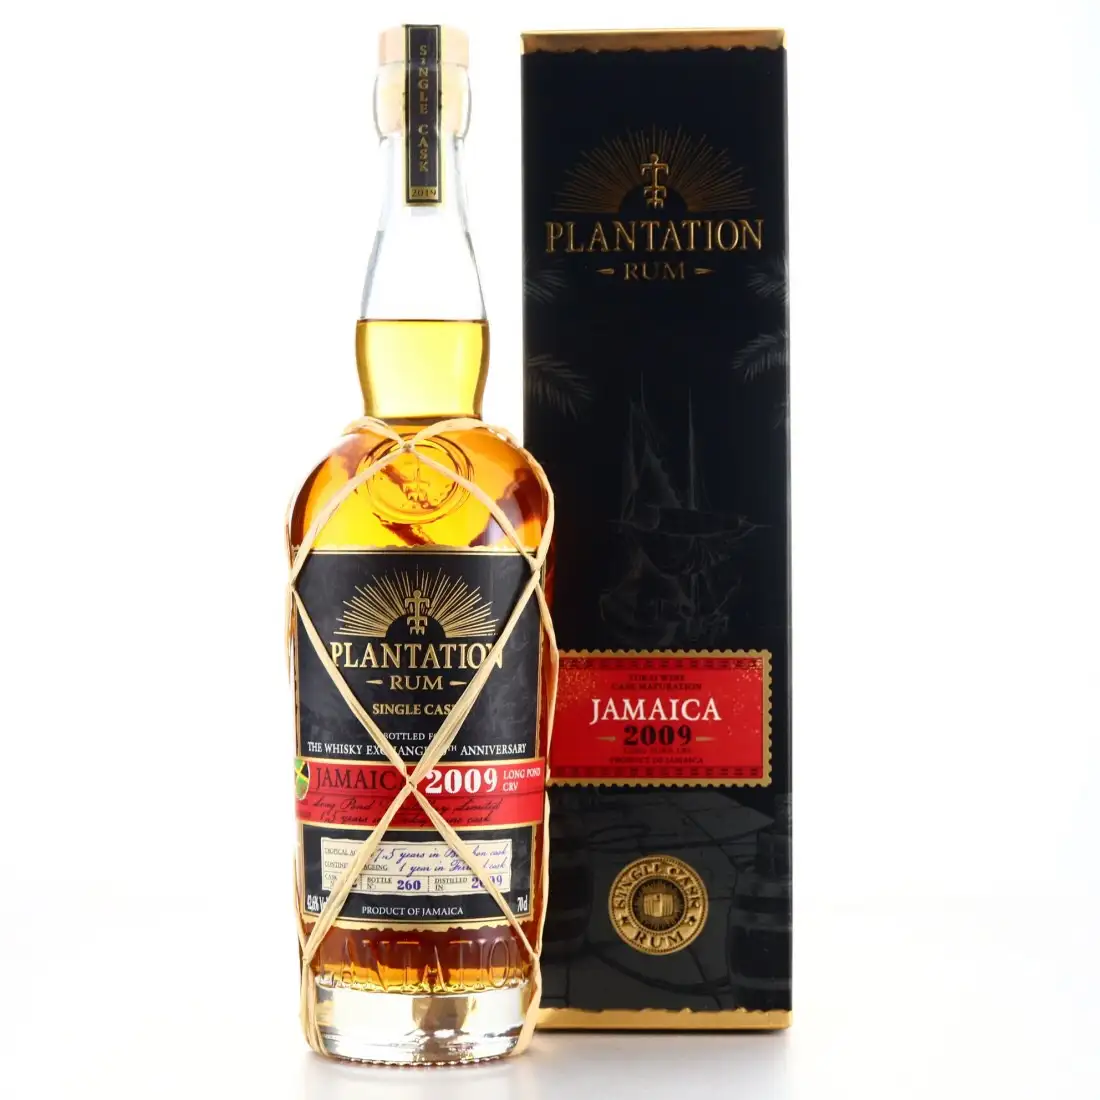 Image of the front of the bottle of the rum Plantation Single Cask CRV